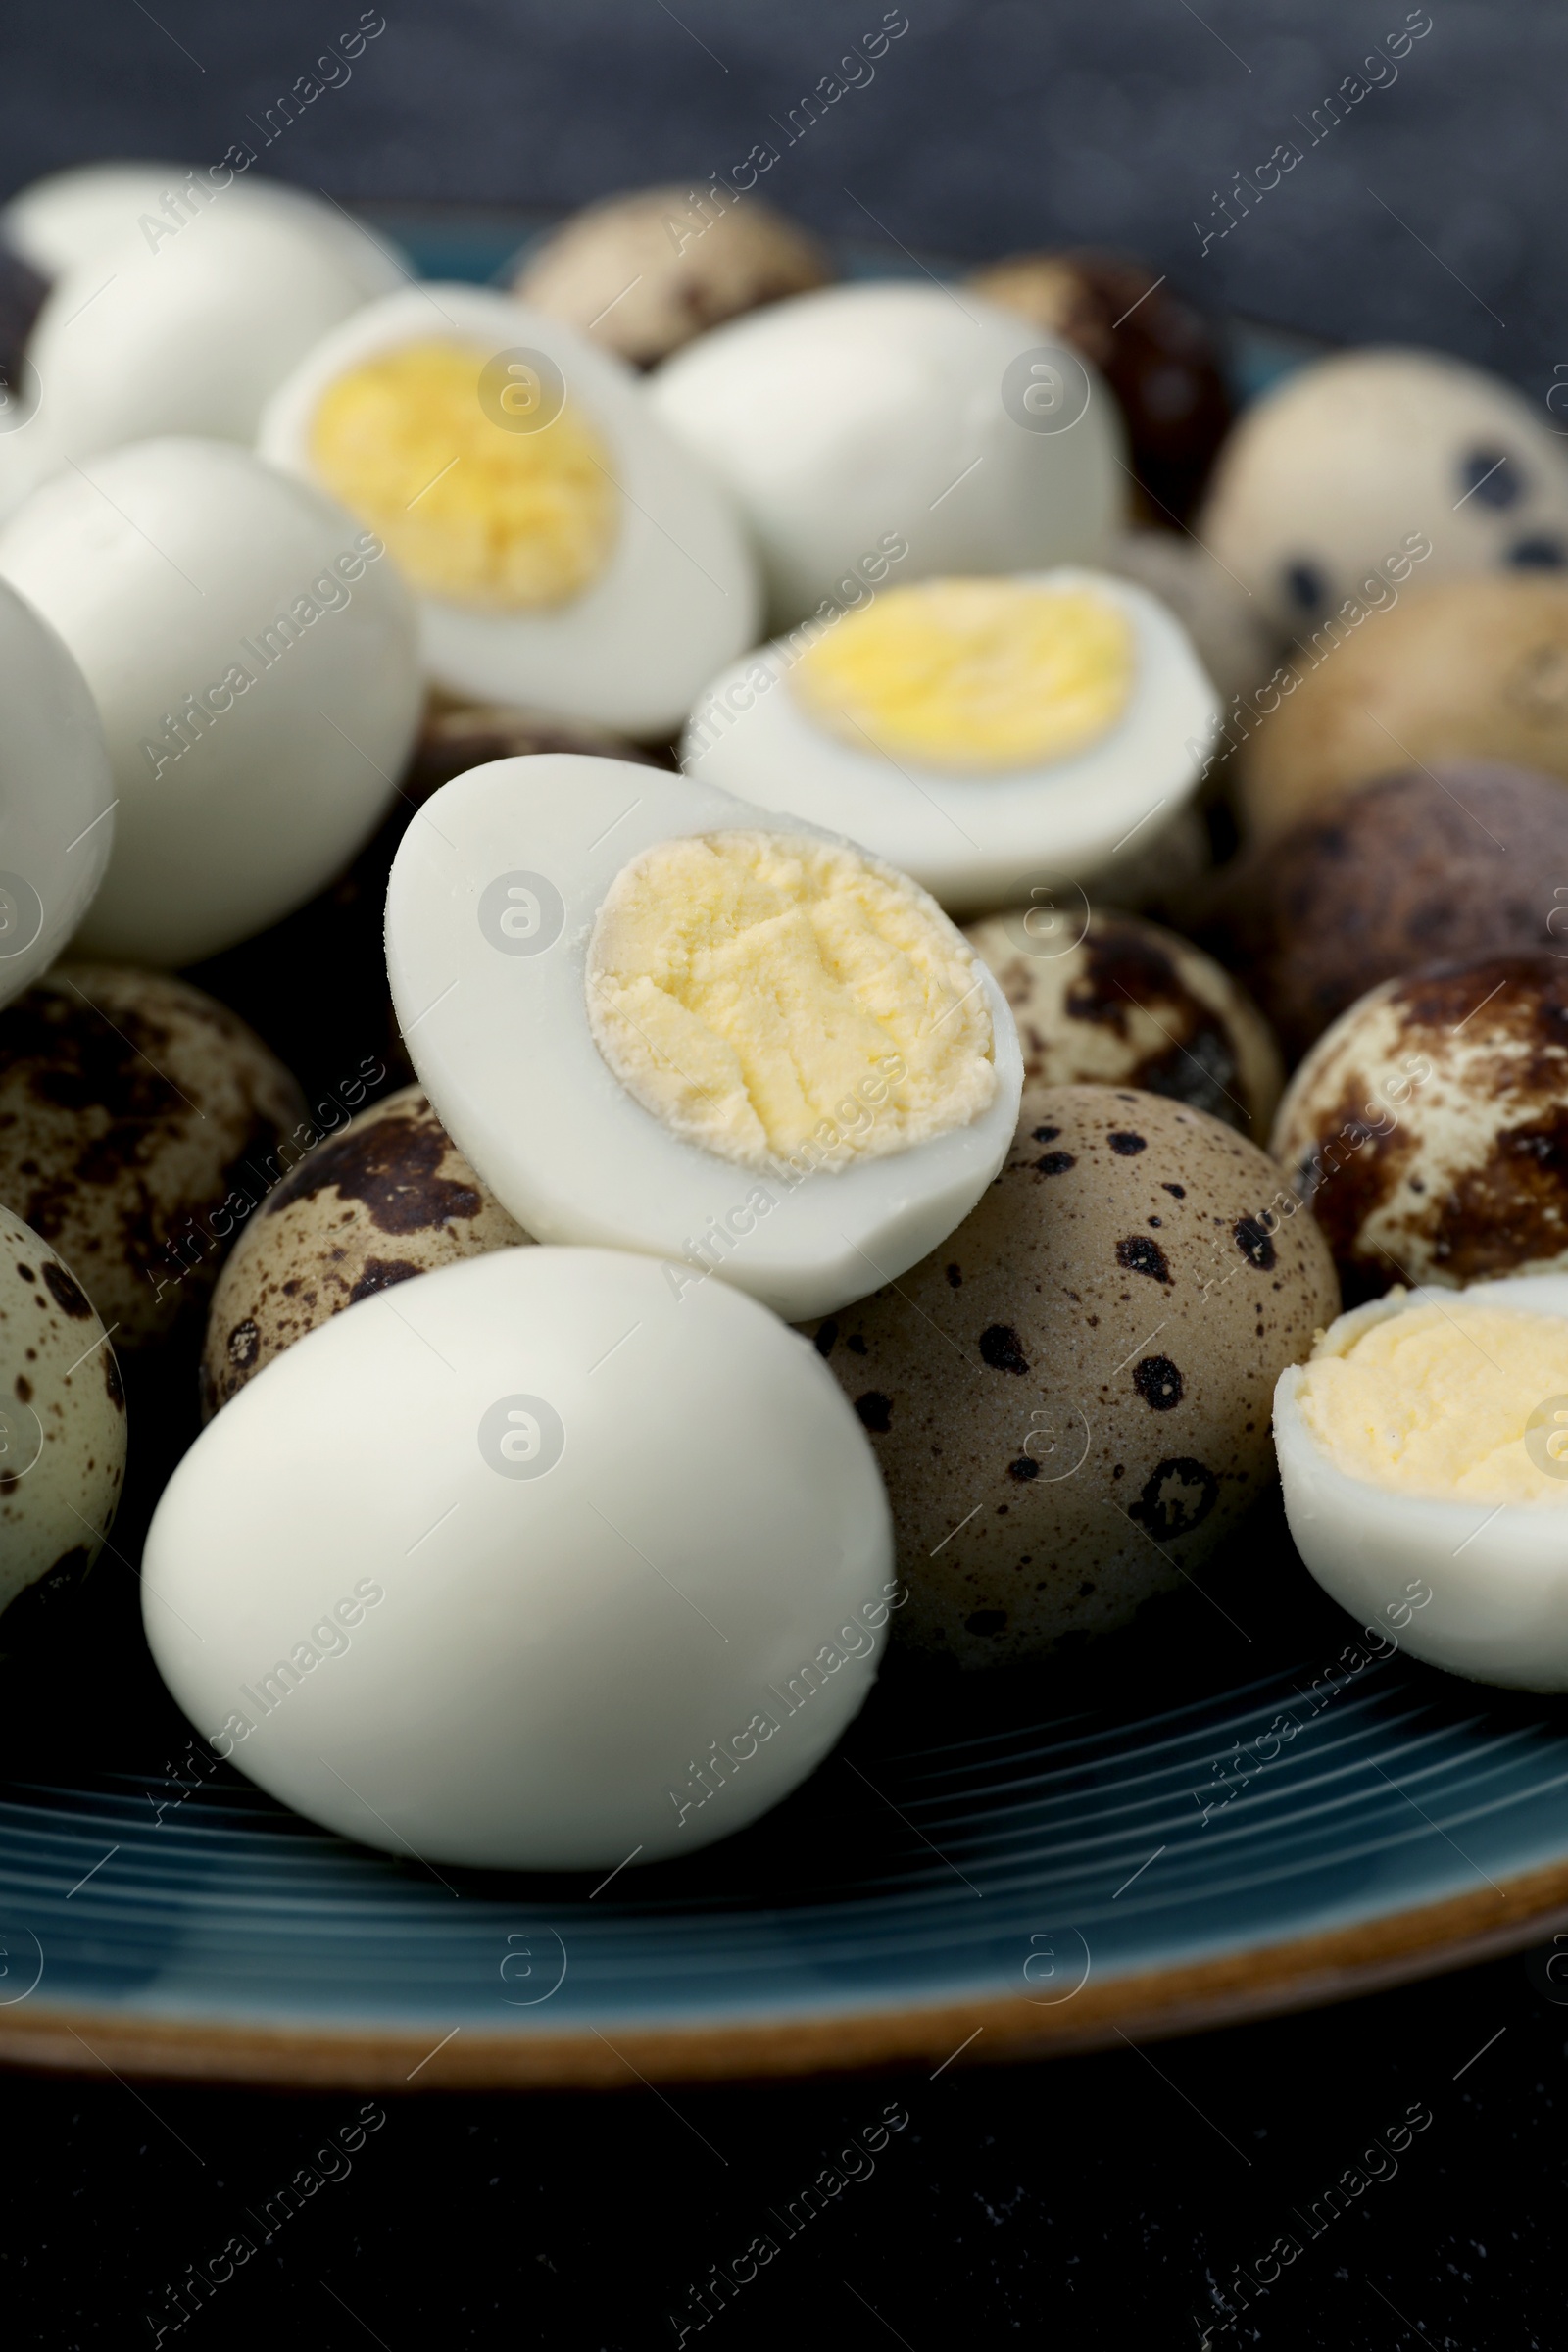 Photo of Peeled and unpeeled hard boiled quail eggs in plate on black table, closeup